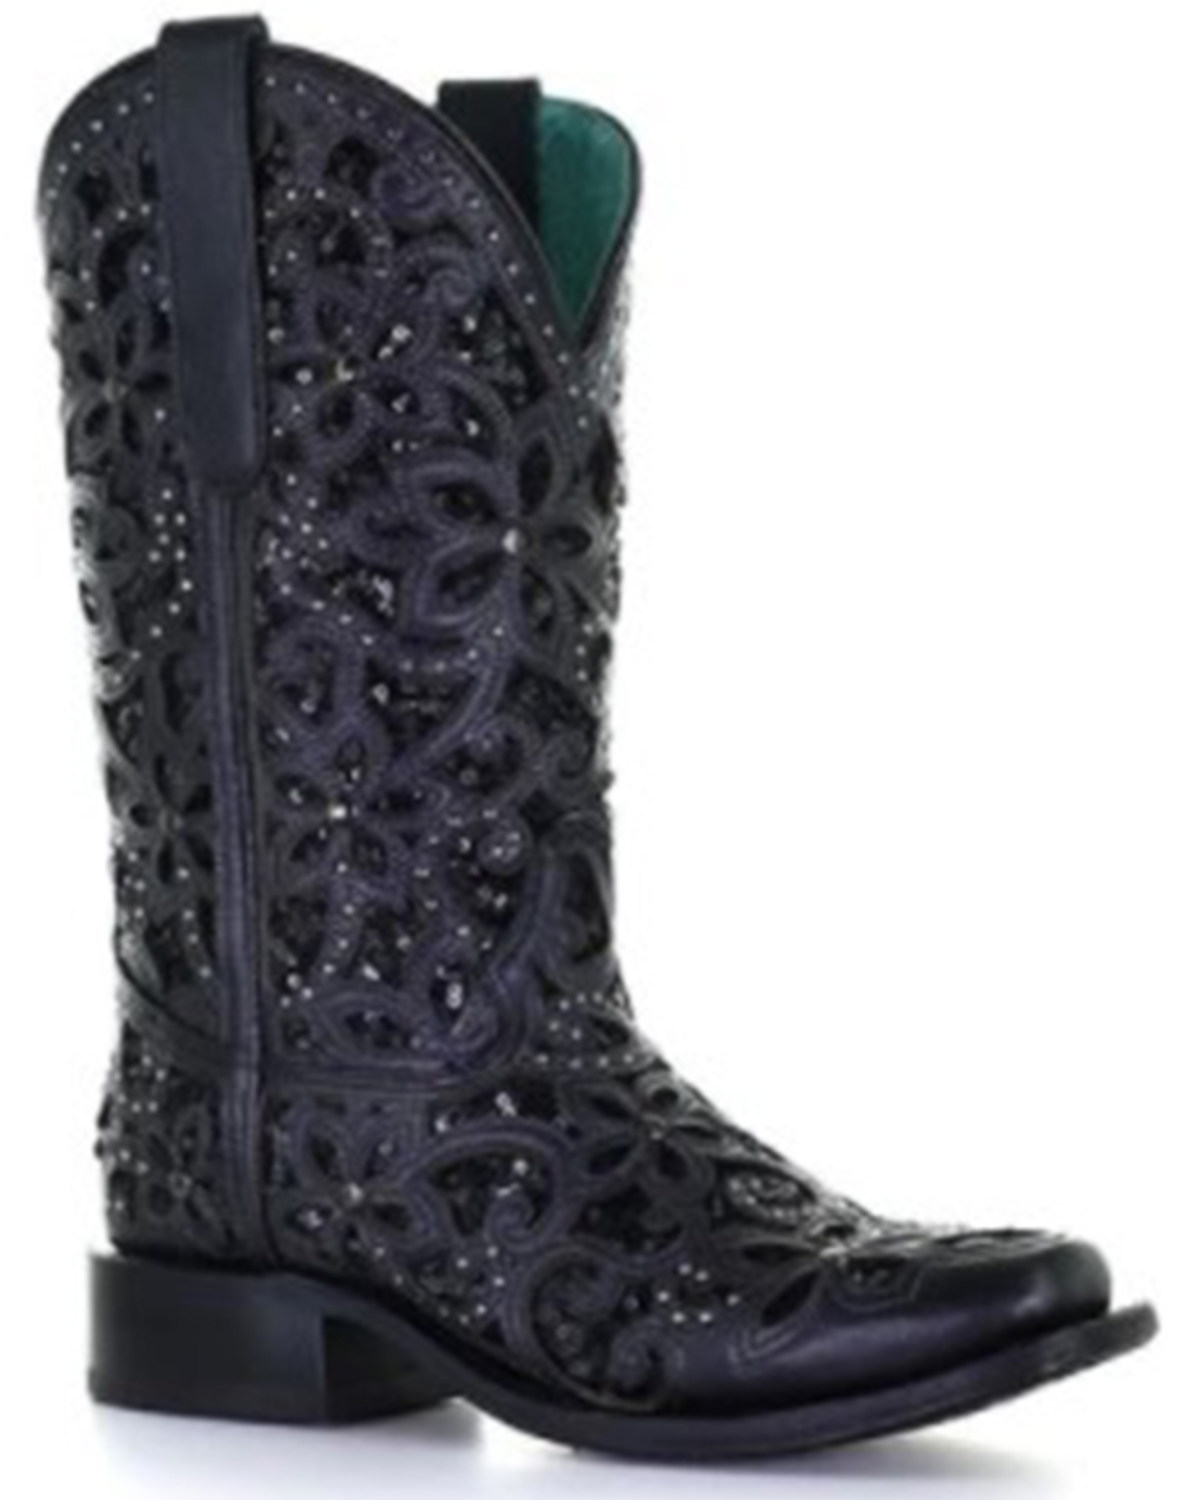 Corral Women's Inlay Embroidered & Stud Cowgirl Boots - Square Toe